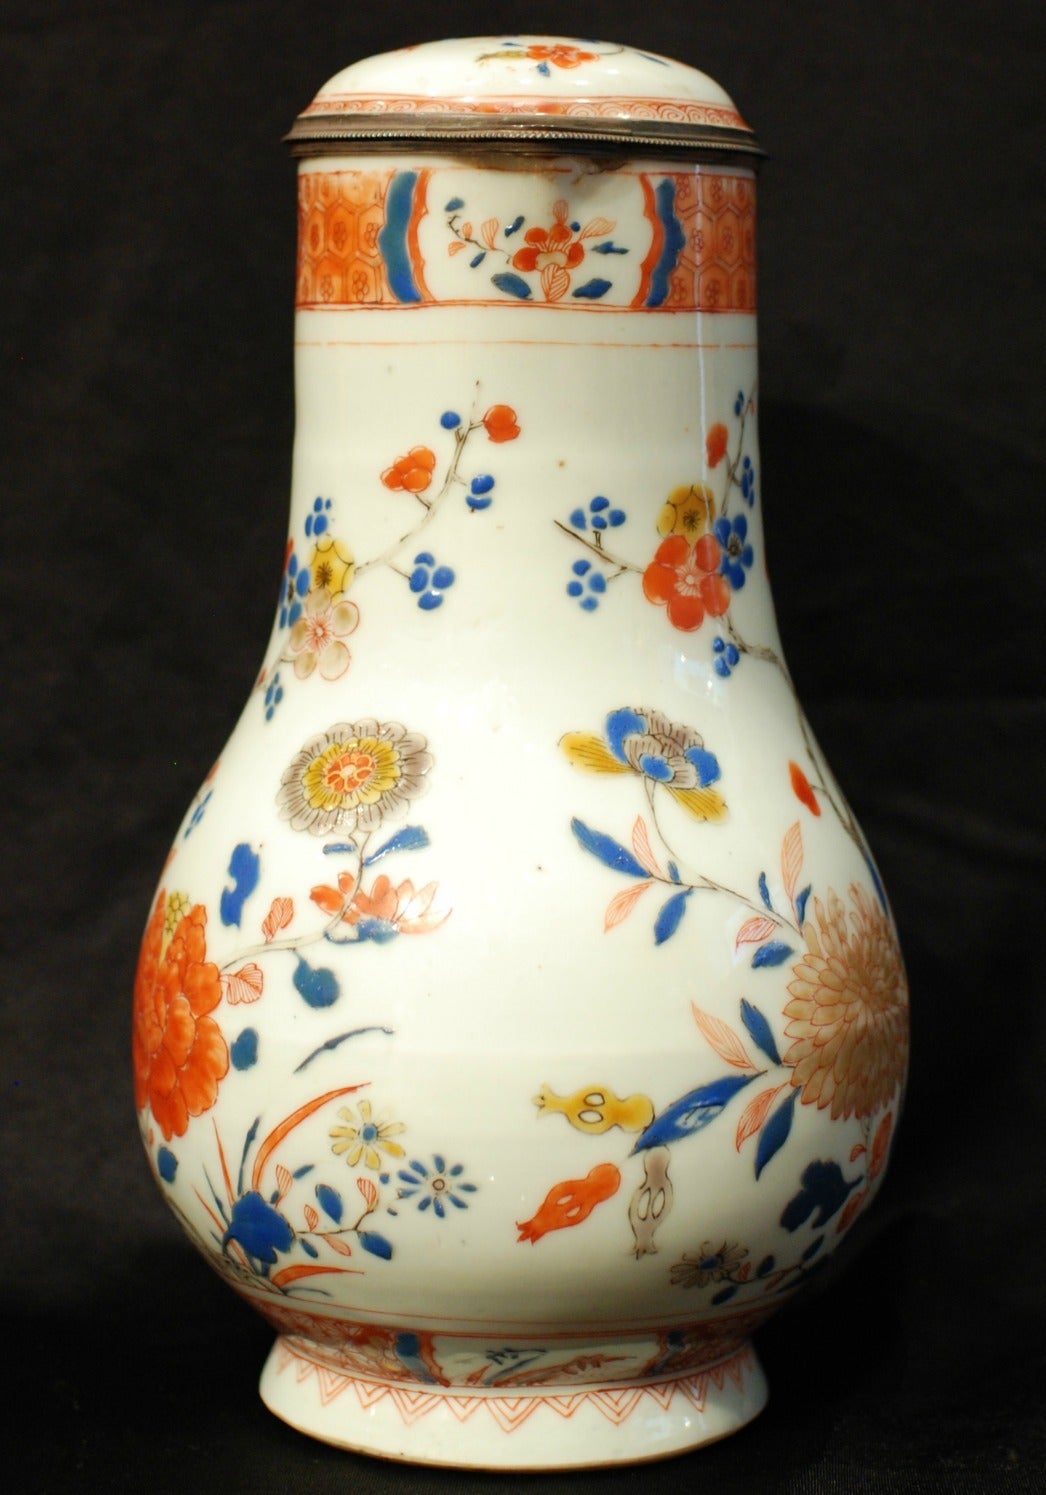 Chinese Export Porcelain Coffee Pot from the 18th Century East India Company